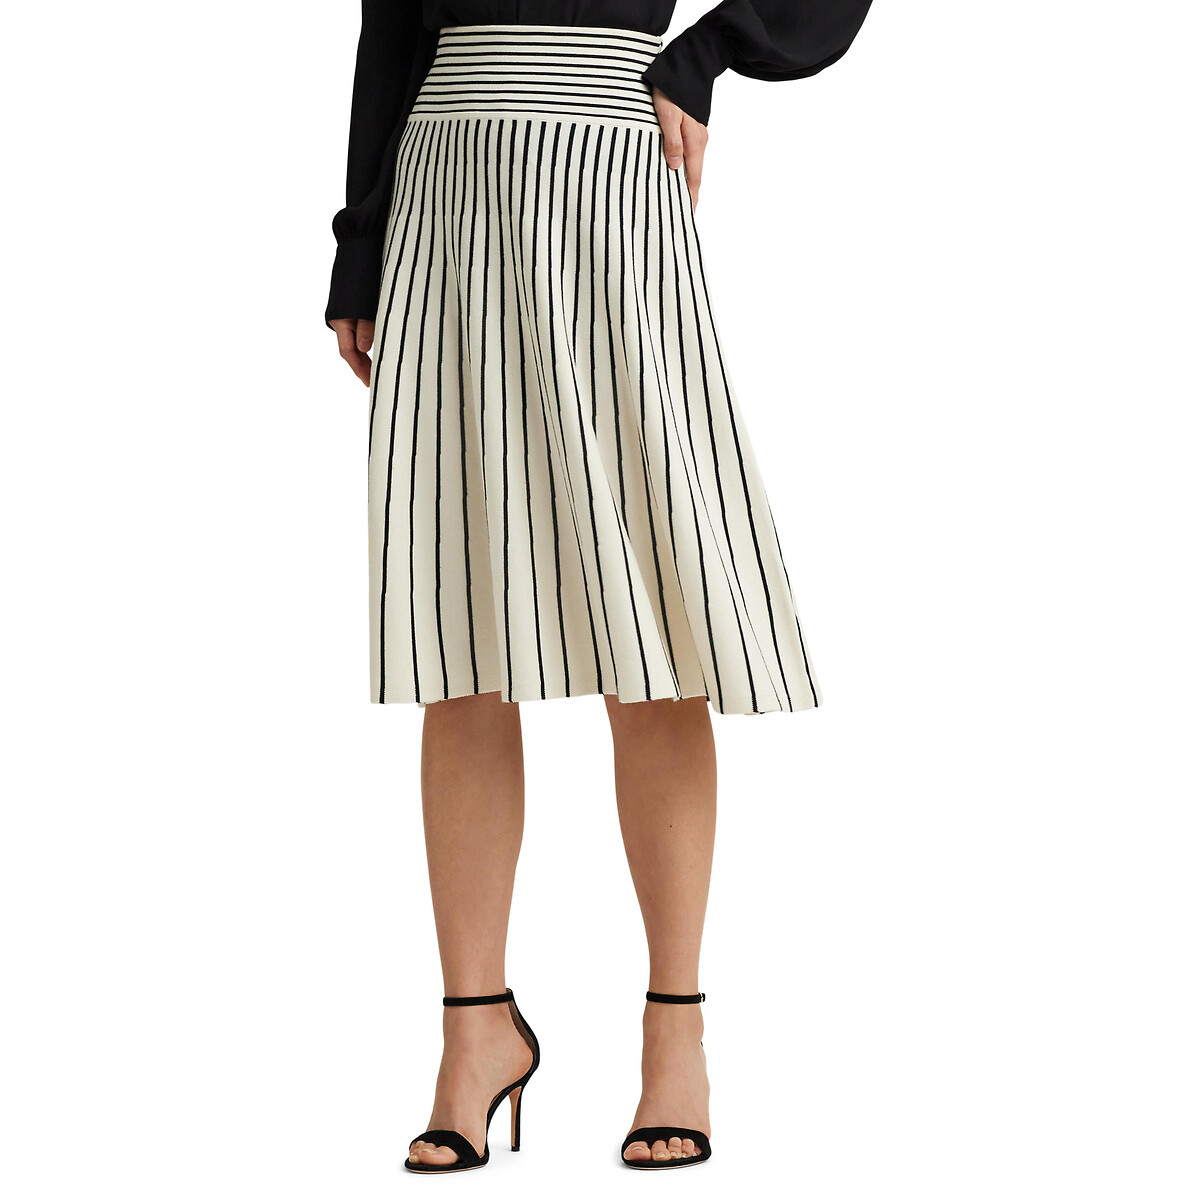 Image of Ayzolle Striped Full Skirt in Cotton Mix with High Waist